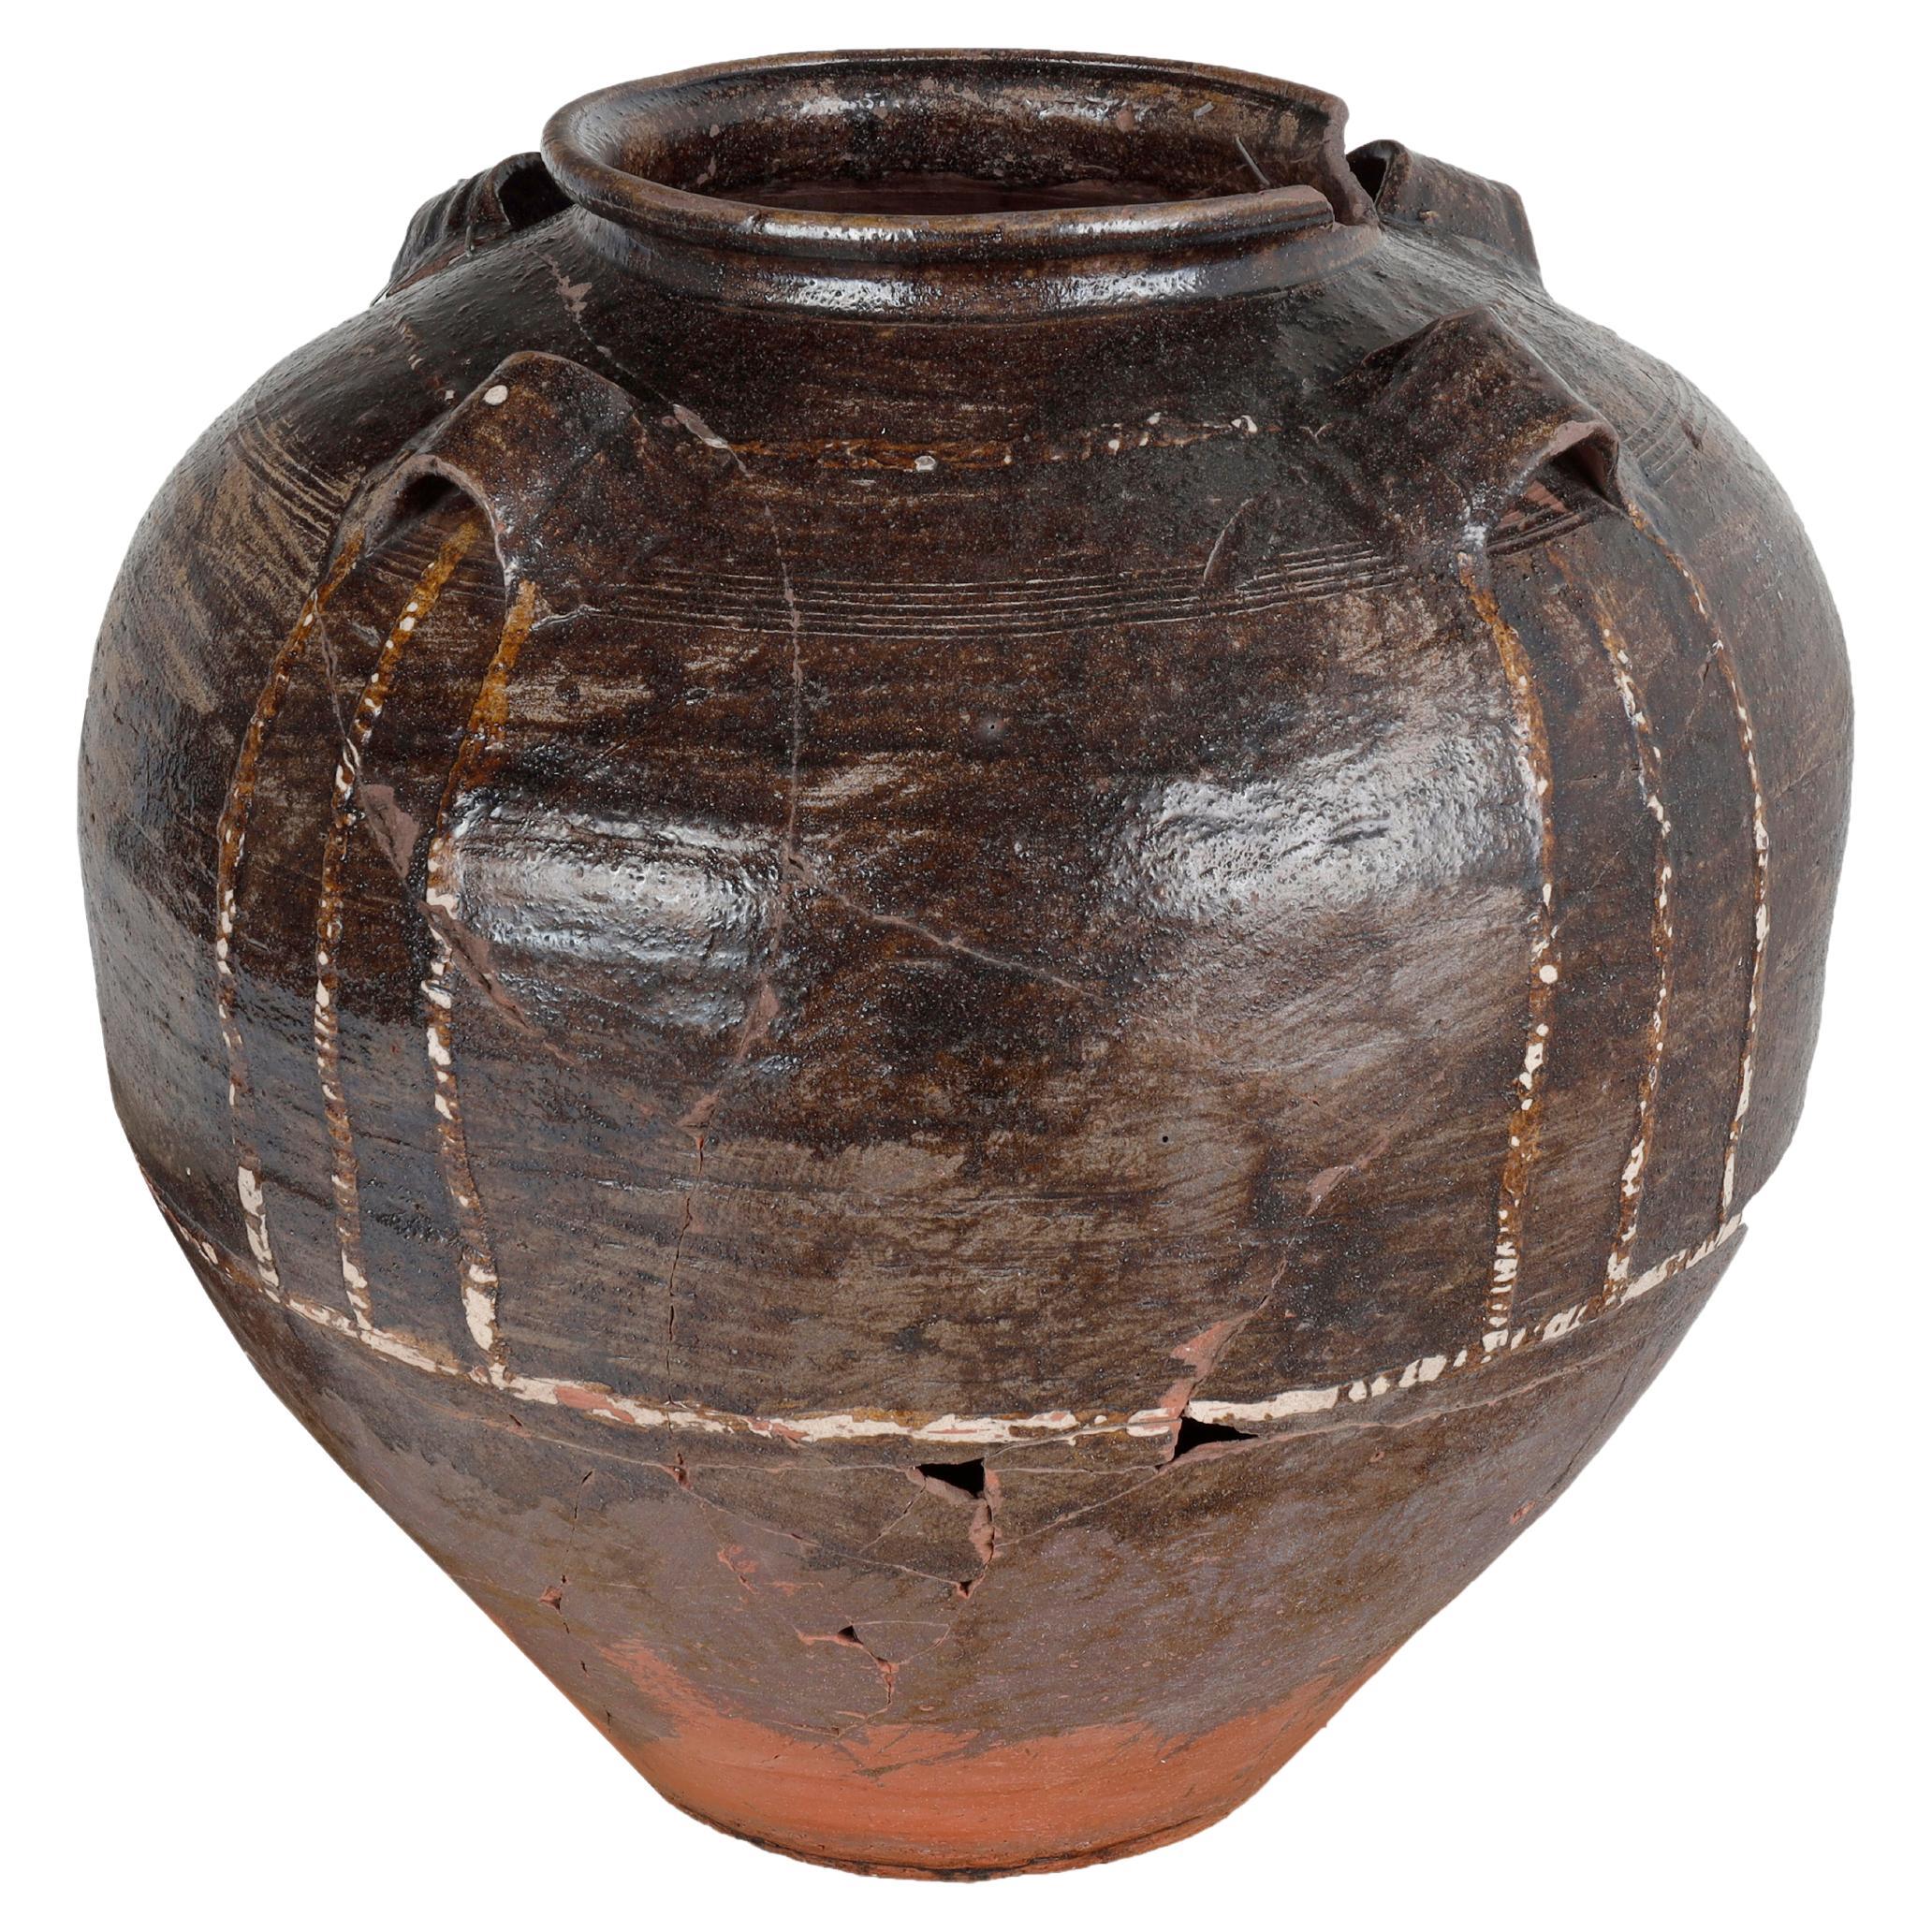 Monumental Cracked Chinese Oil Jar with Repairs 